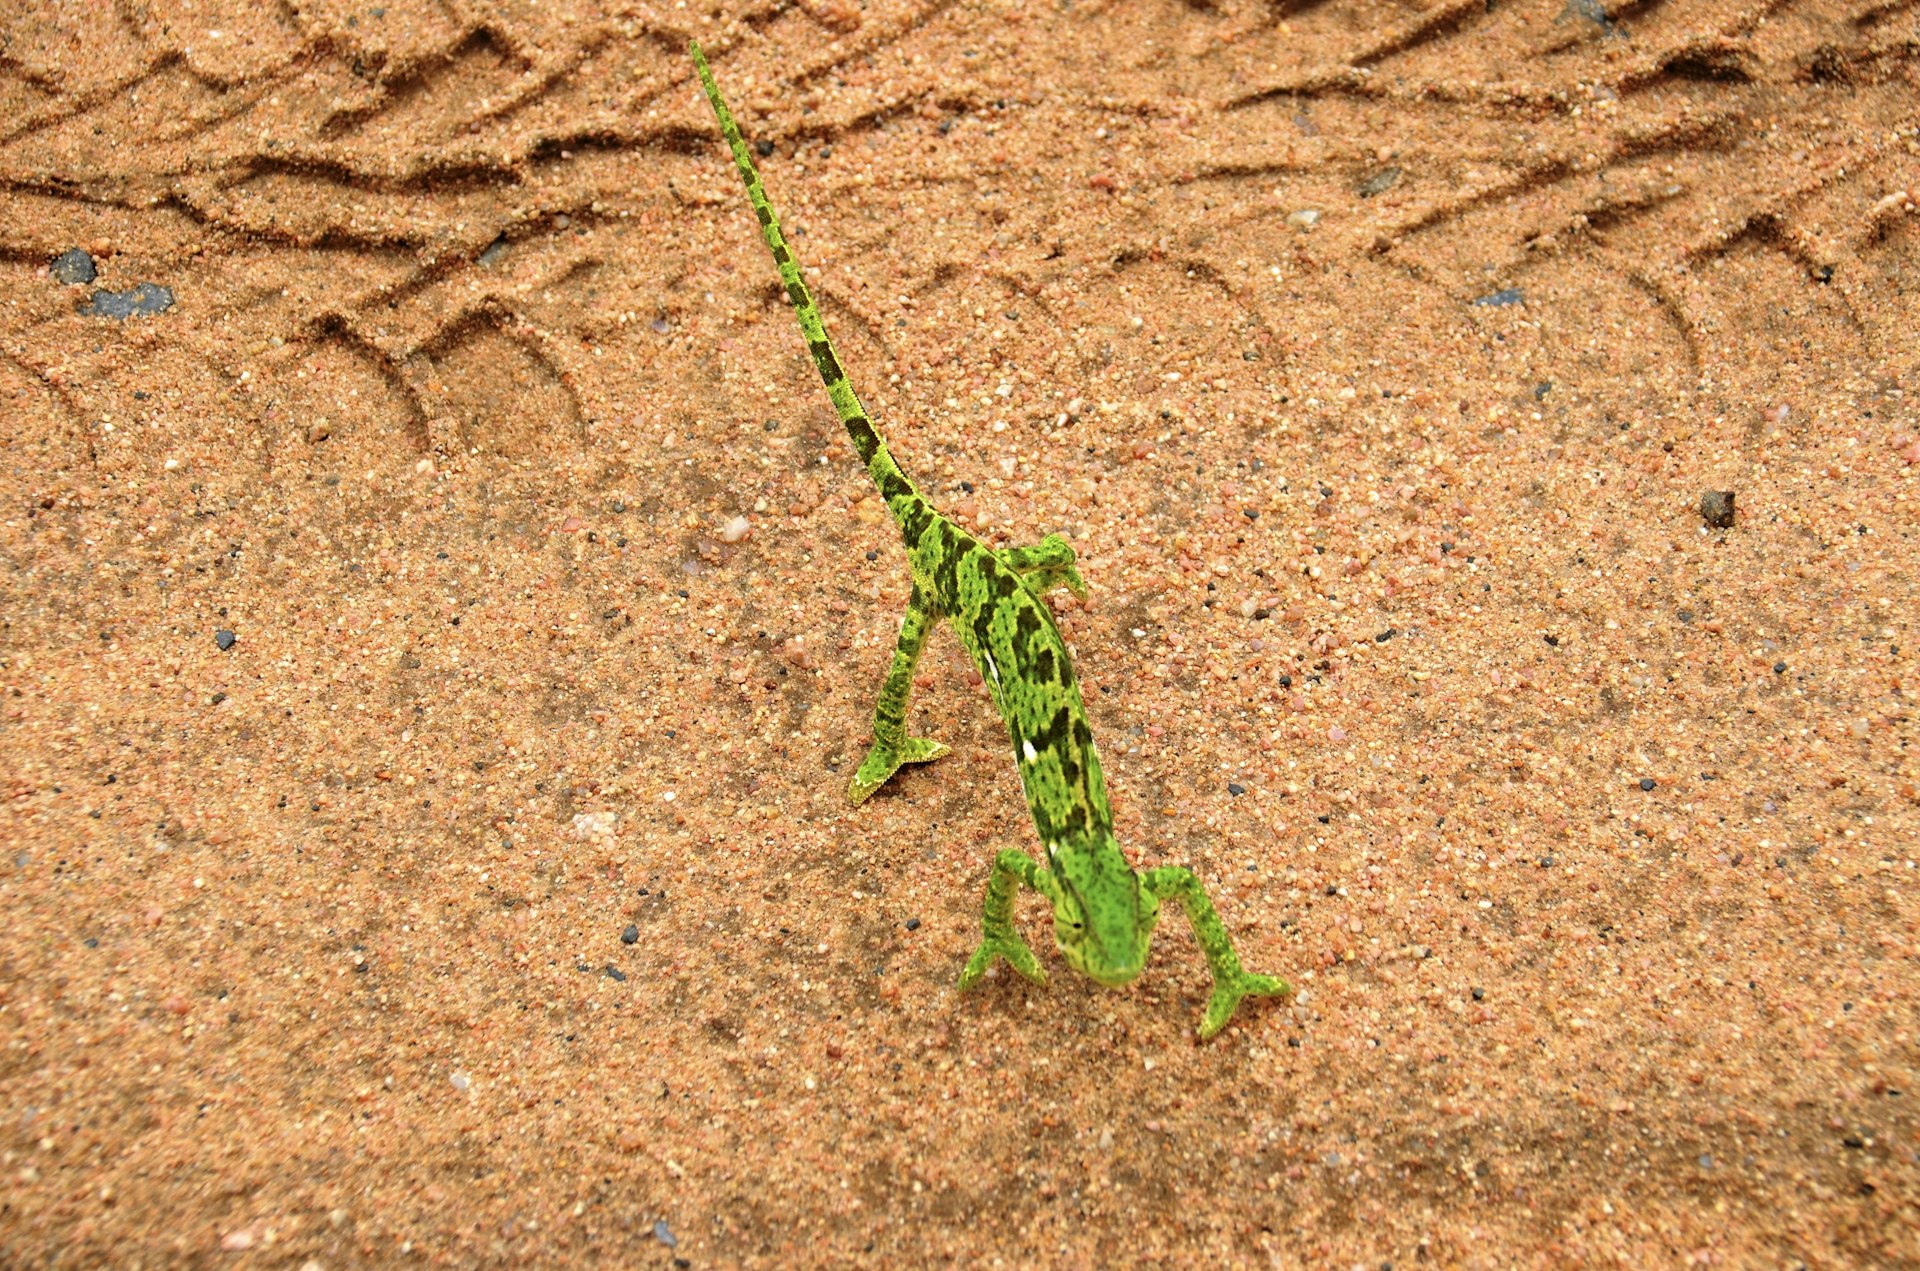 A bright green chameleon walks across the tyre tracks of a vehicle on a sand road in the park.